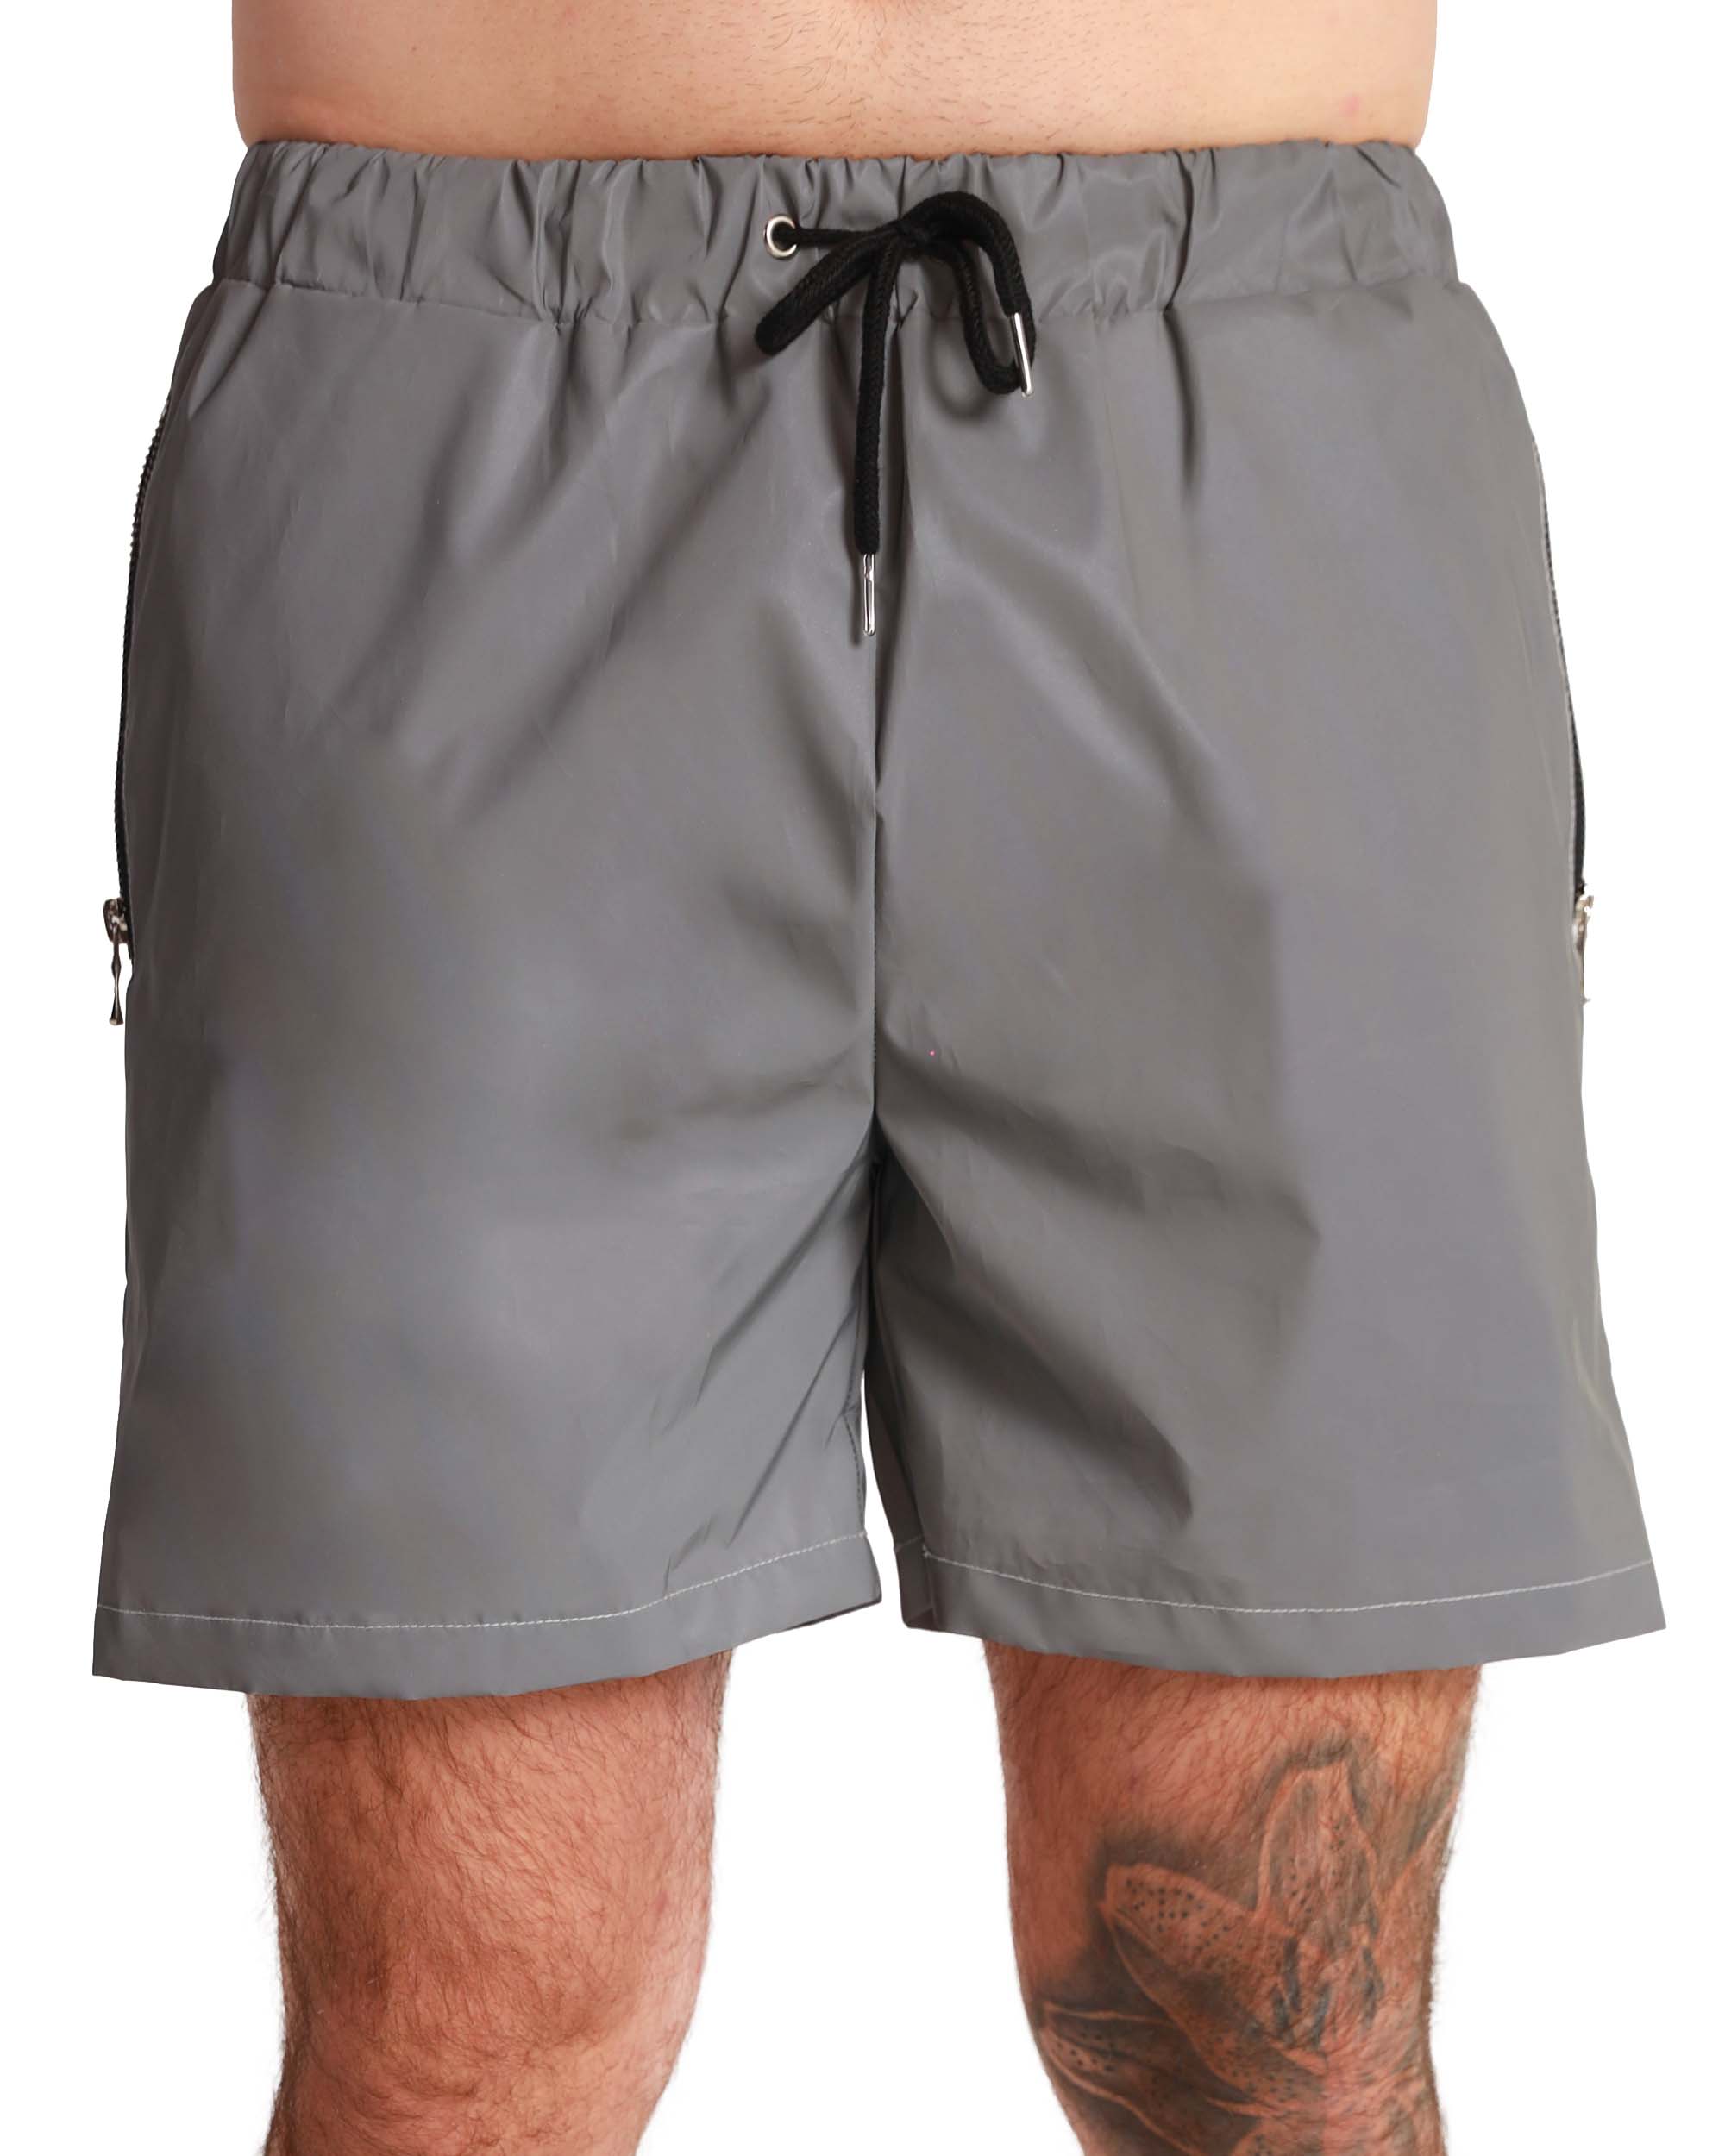 Complete Collapse Men's Silver Reflective Shorts-Black/Silver-Front--David---M